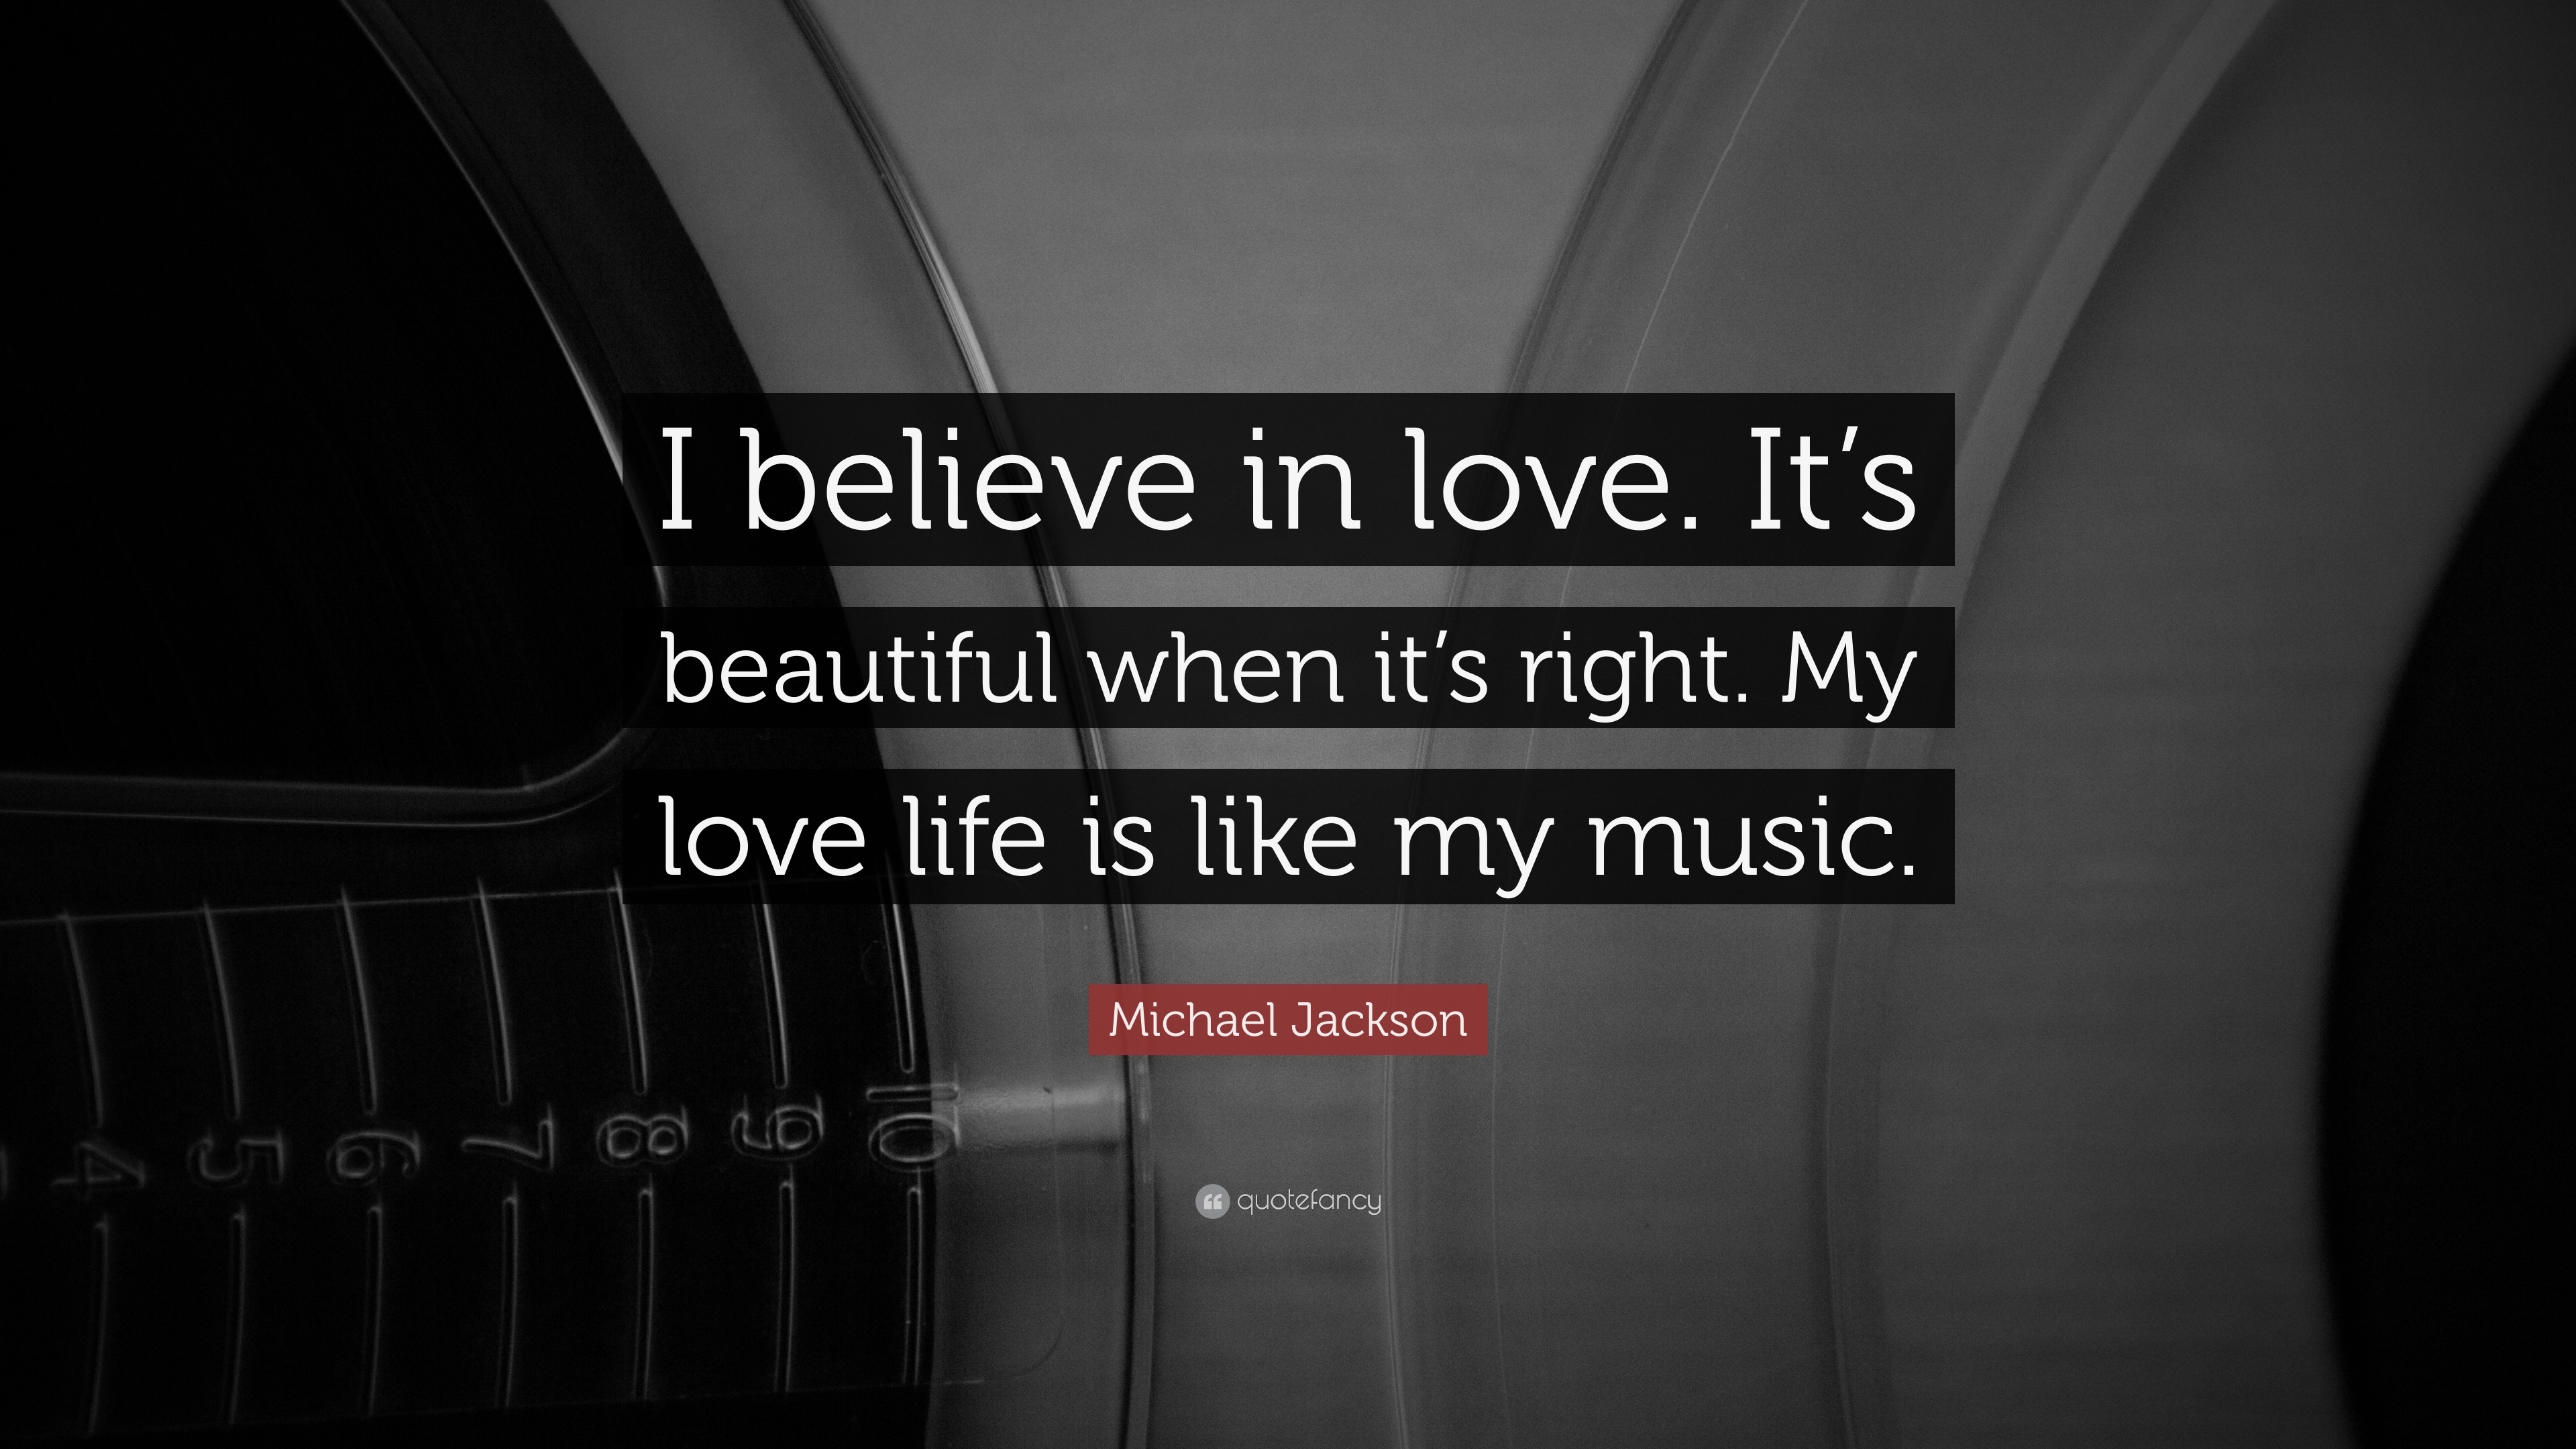 Michael Jackson Quote: "I believe in love. It's beautiful when it's right. My love life is like ...